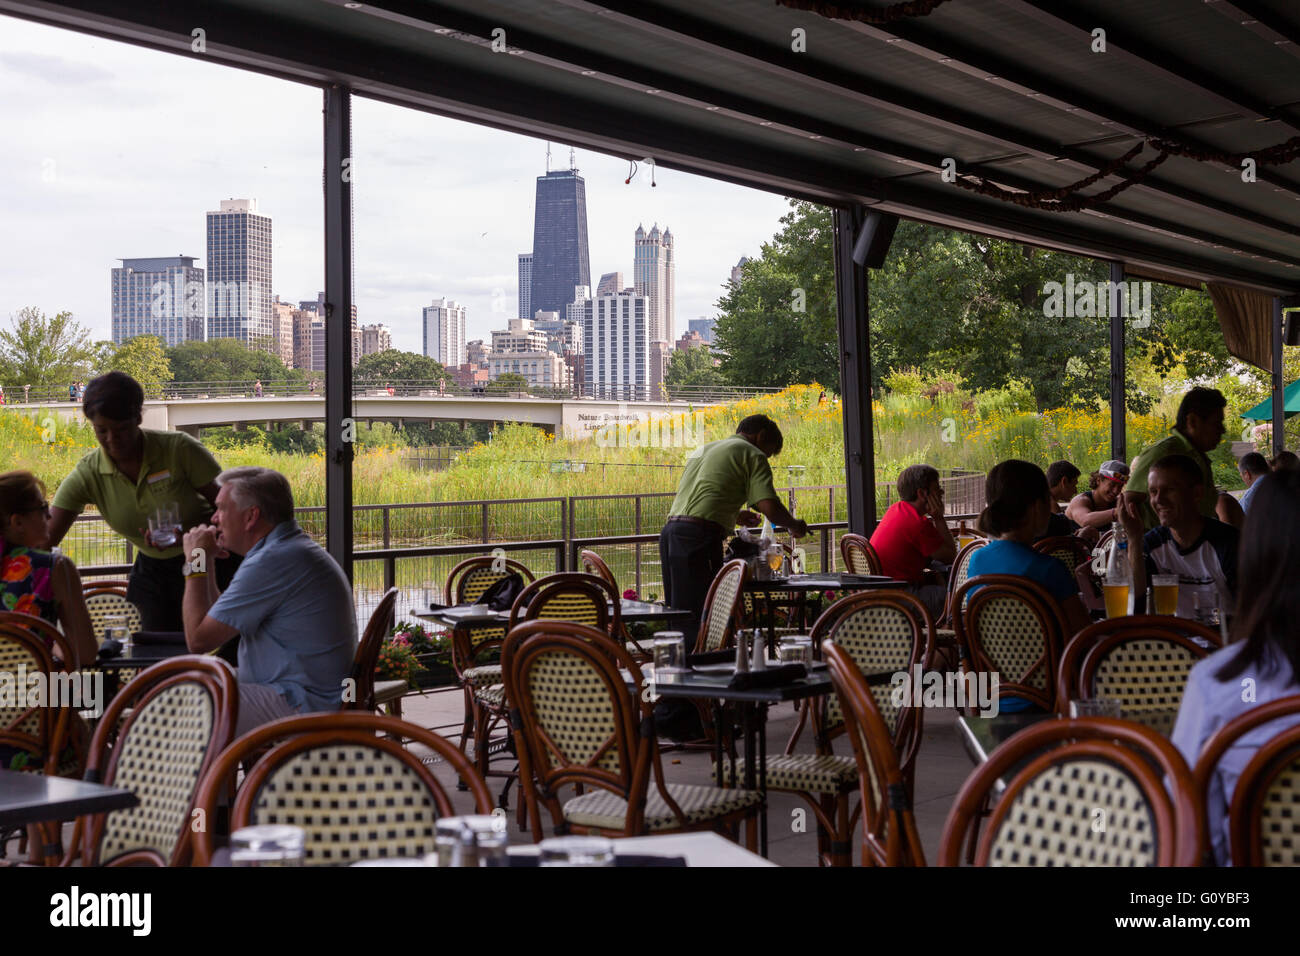 Patrons enjoy the outdoor cafe at the North Pond restaurant in Lincoln Park on a summers day in Chicago, Illinois, USA Stock Photo